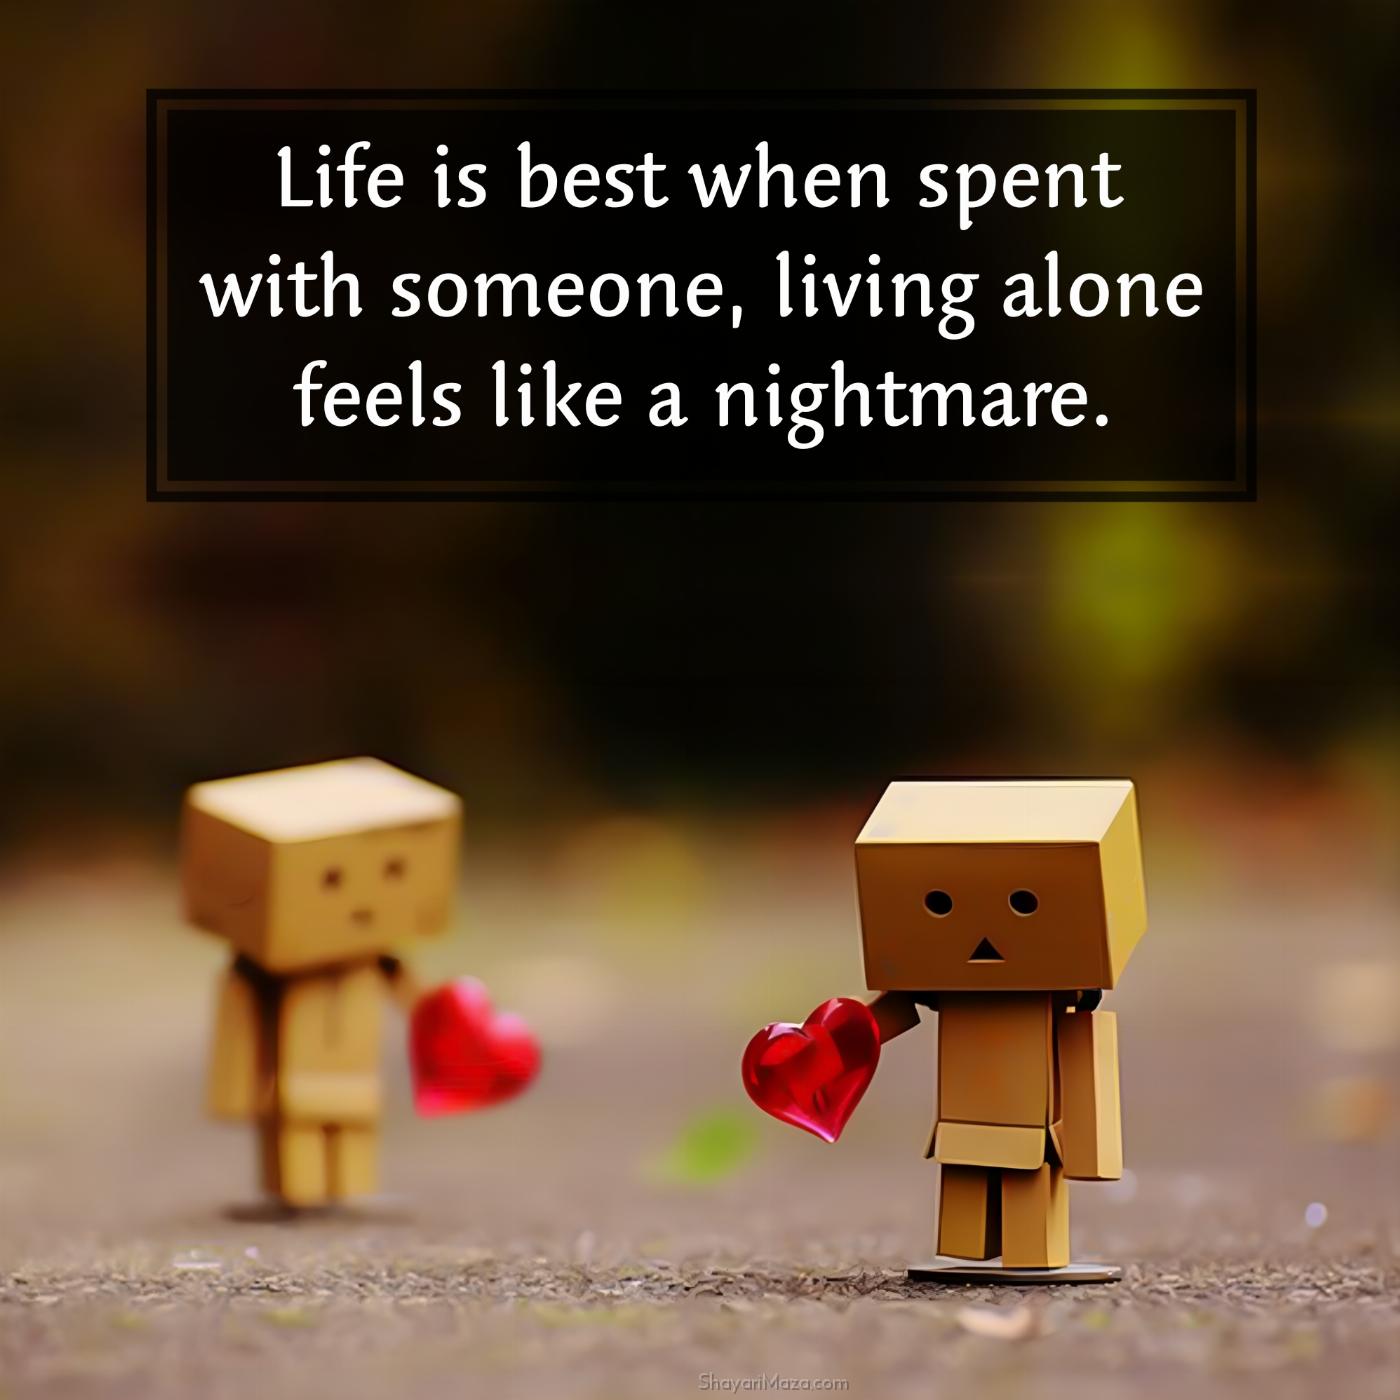 Life is best when spent with someone